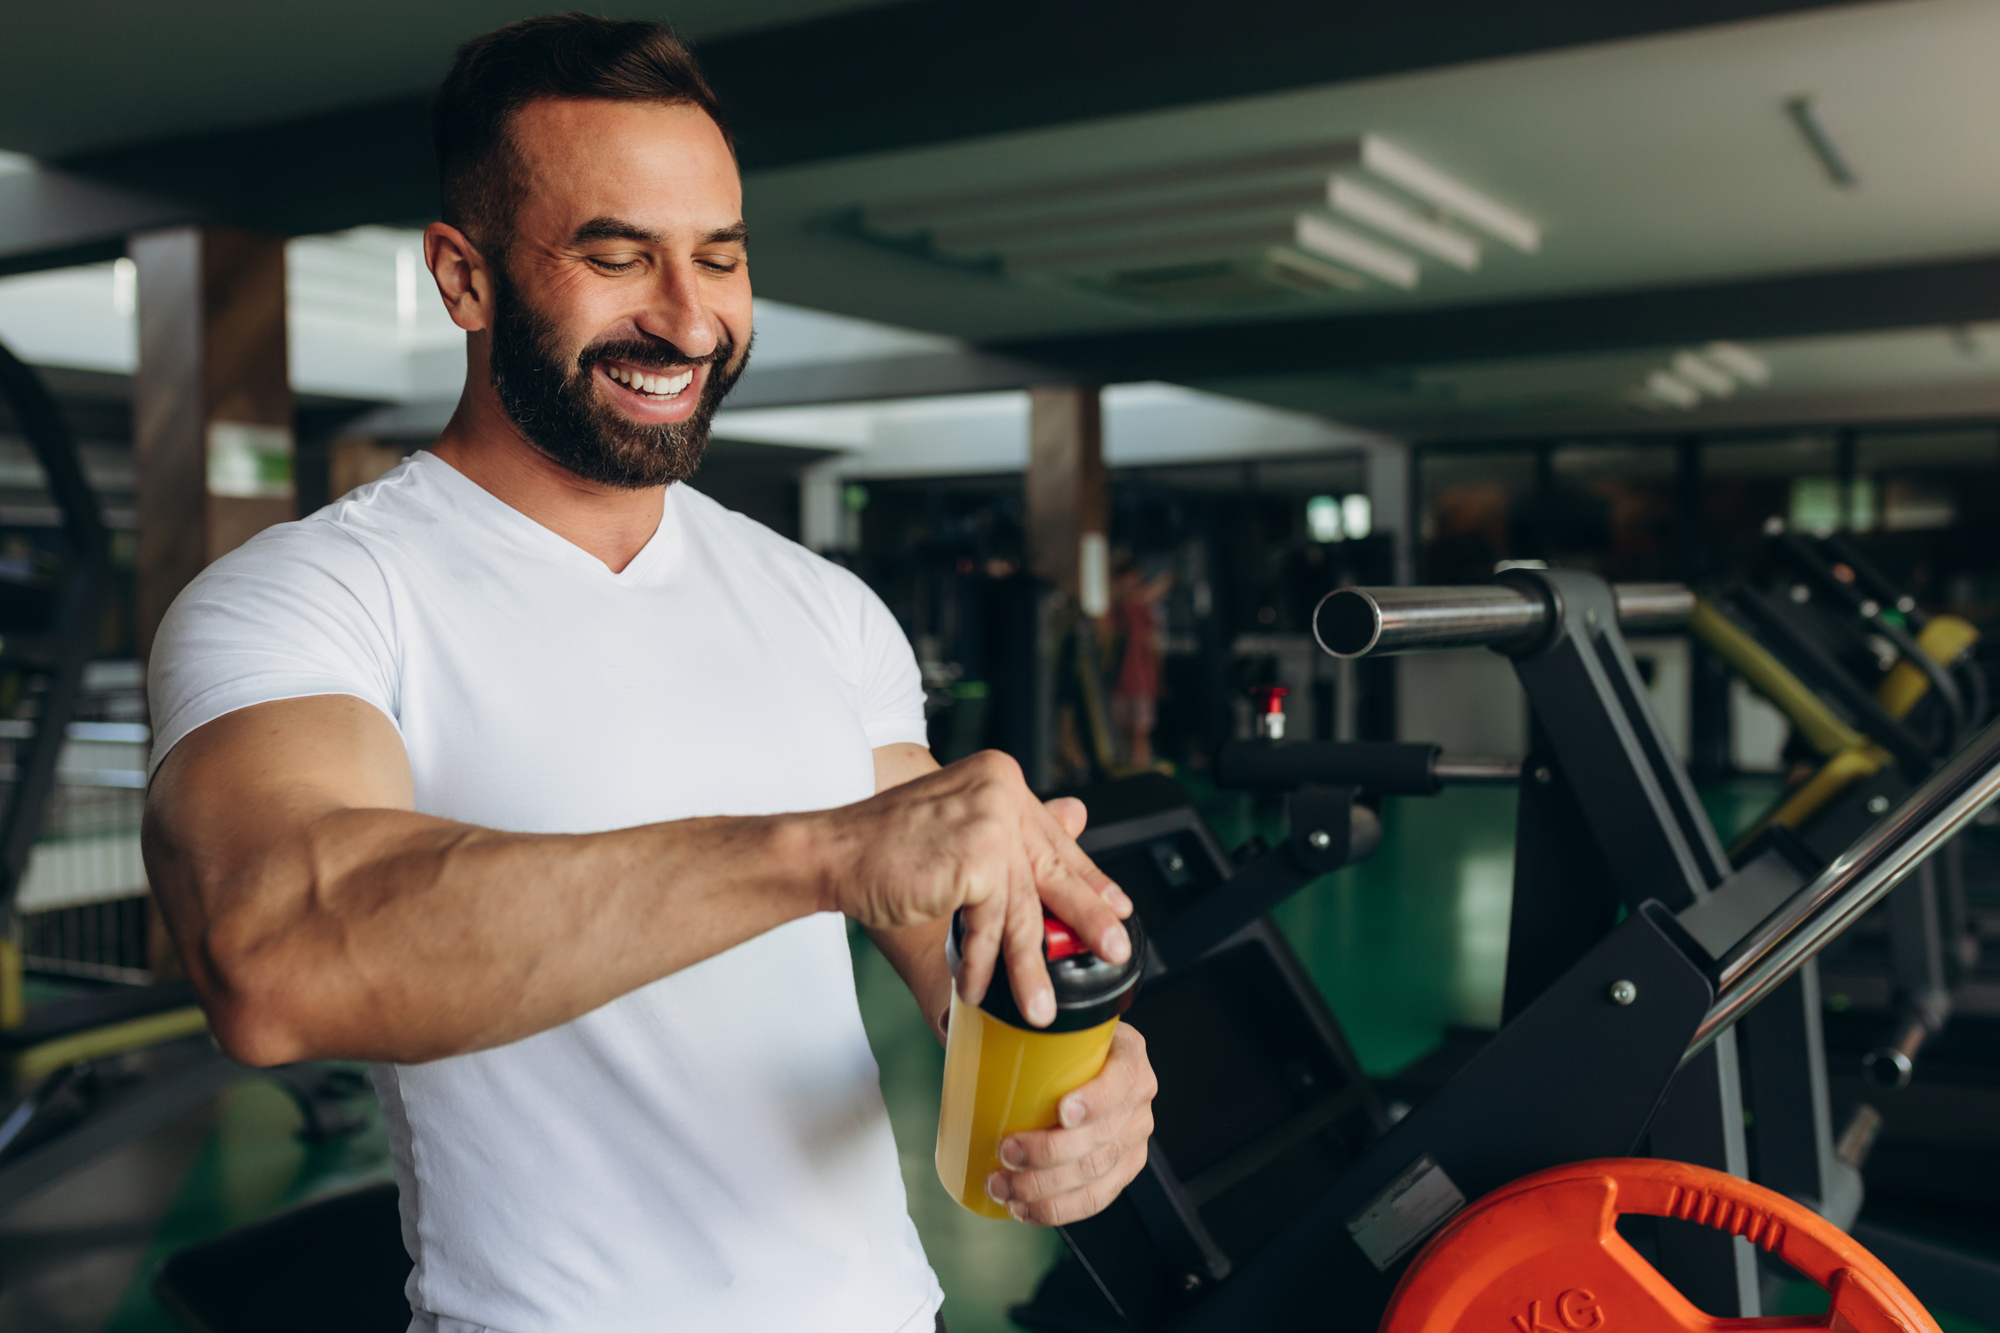 Man smiling in a gym holding a shaker bottle while next to exercise equipment